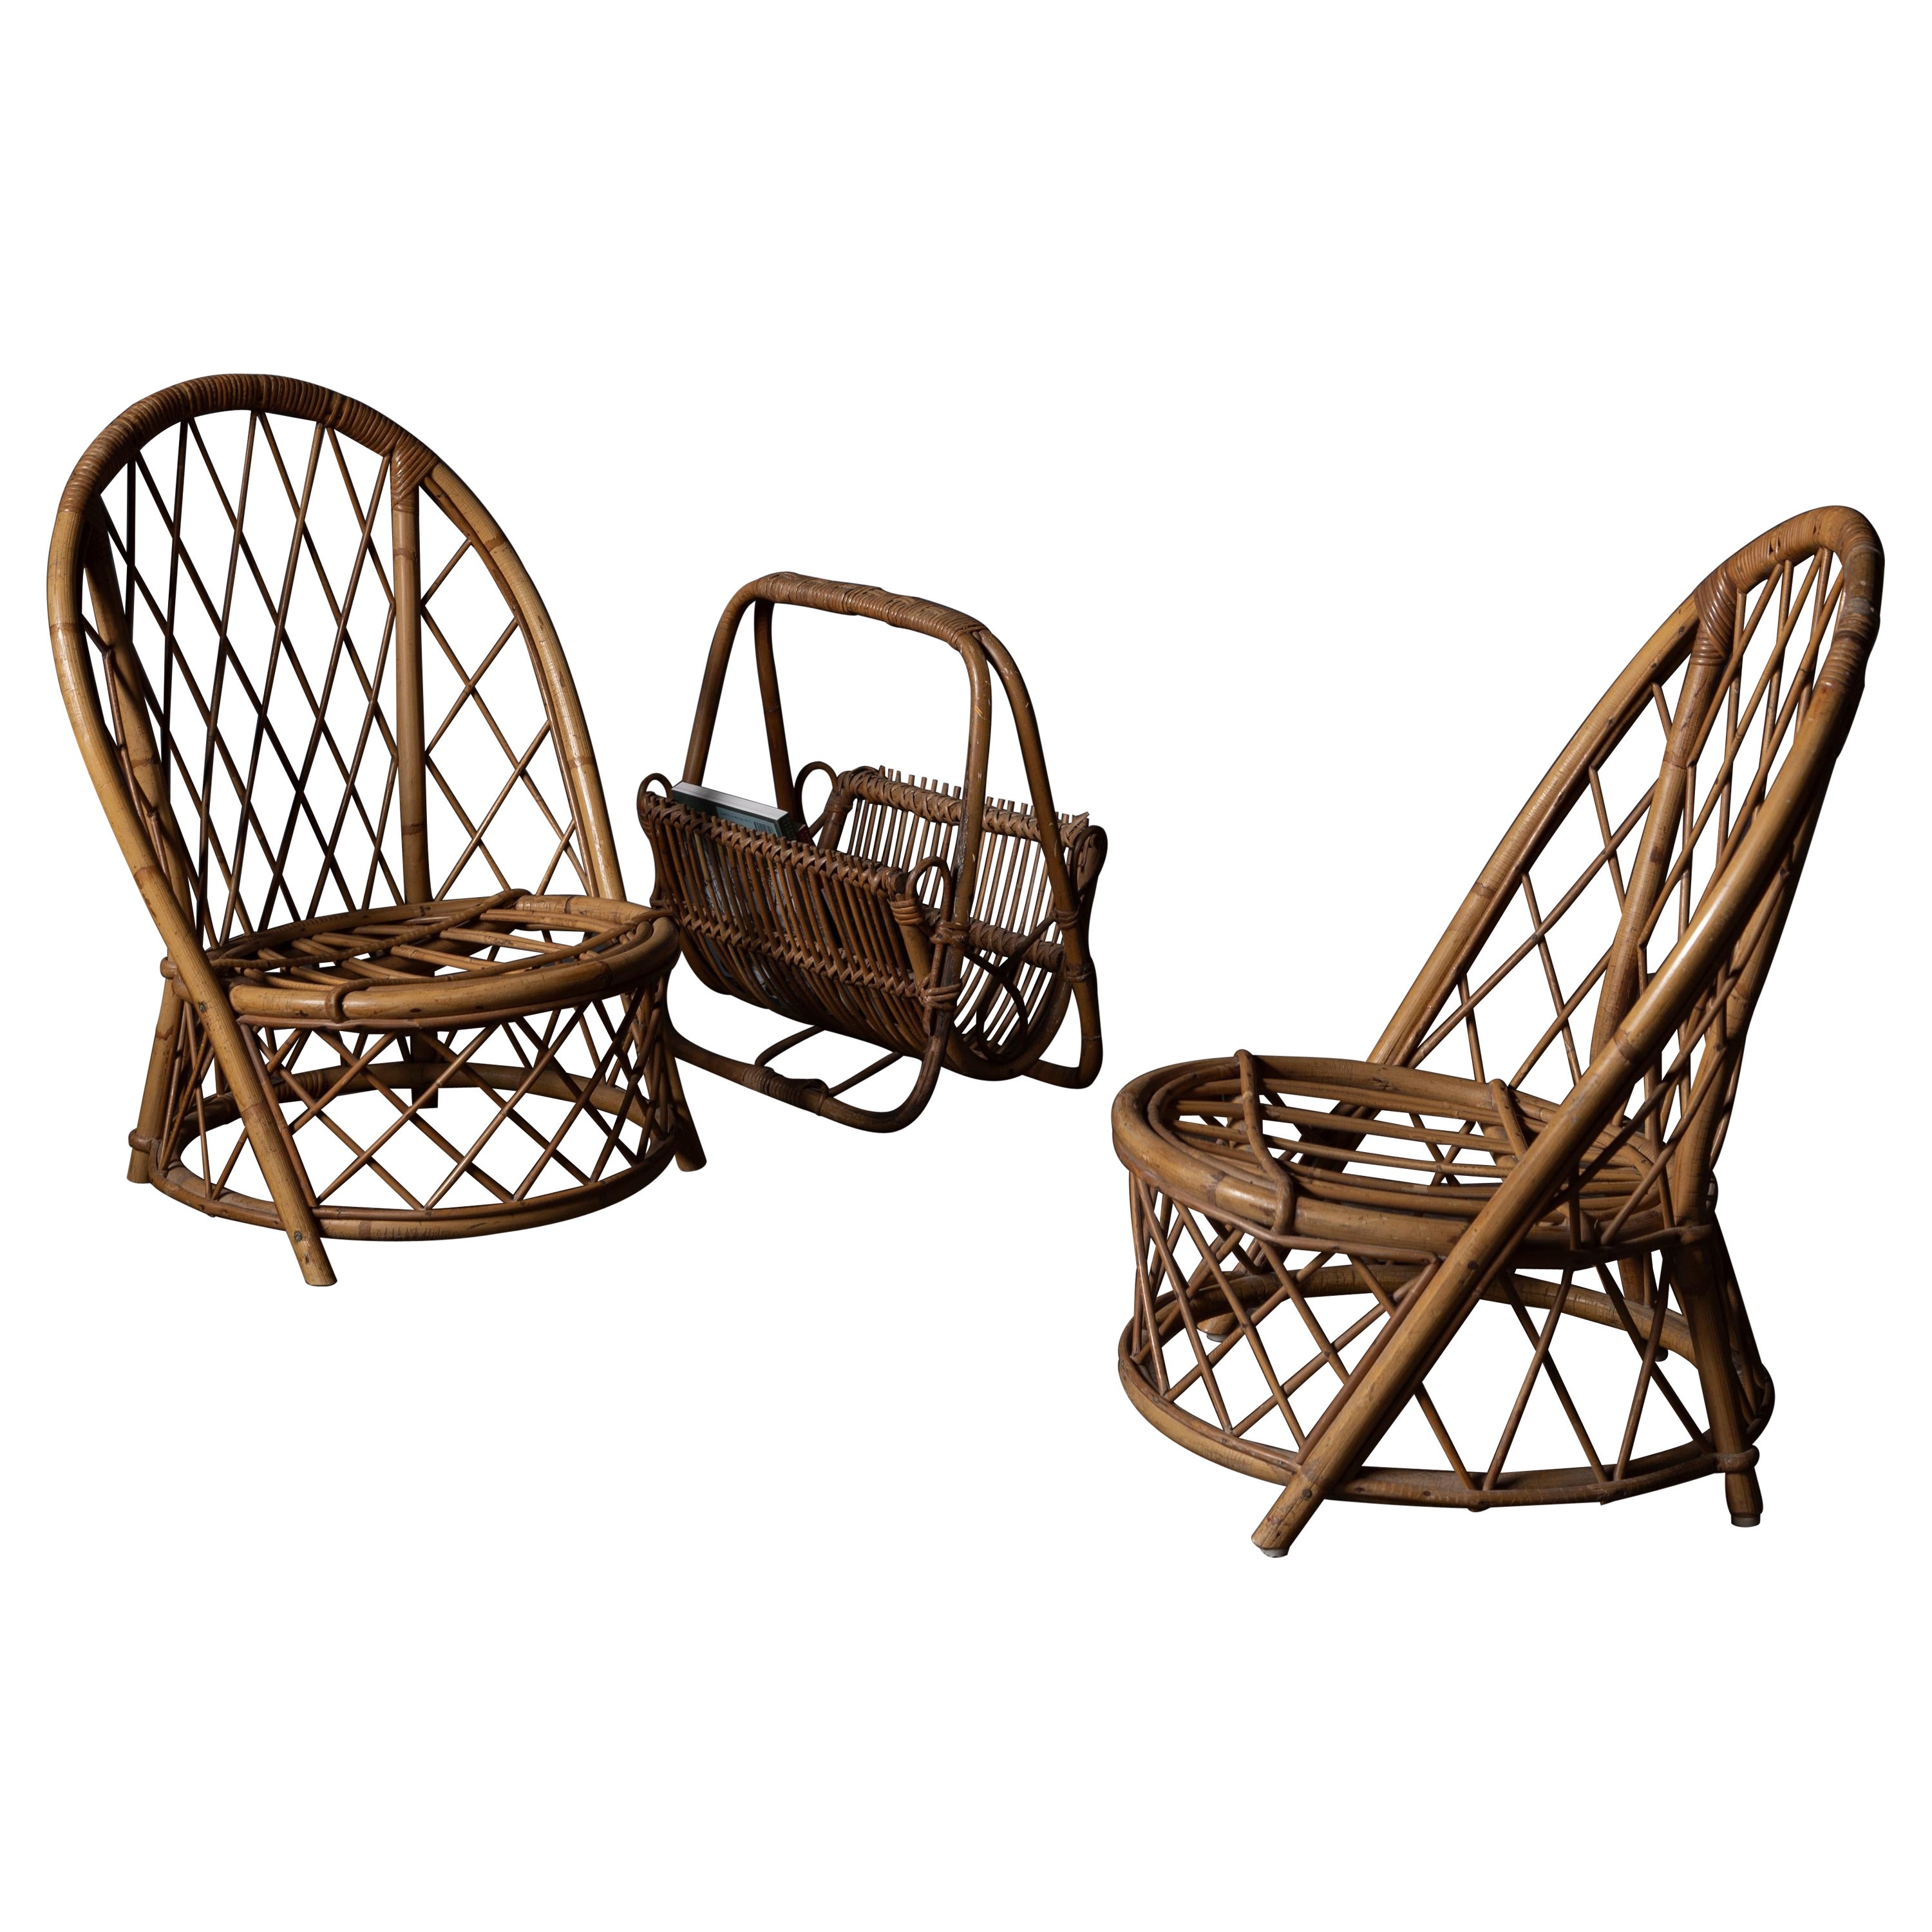 Set of Two Rattan Low Chairs and a Magazine Rack, Audoux Minet, 1960s, France